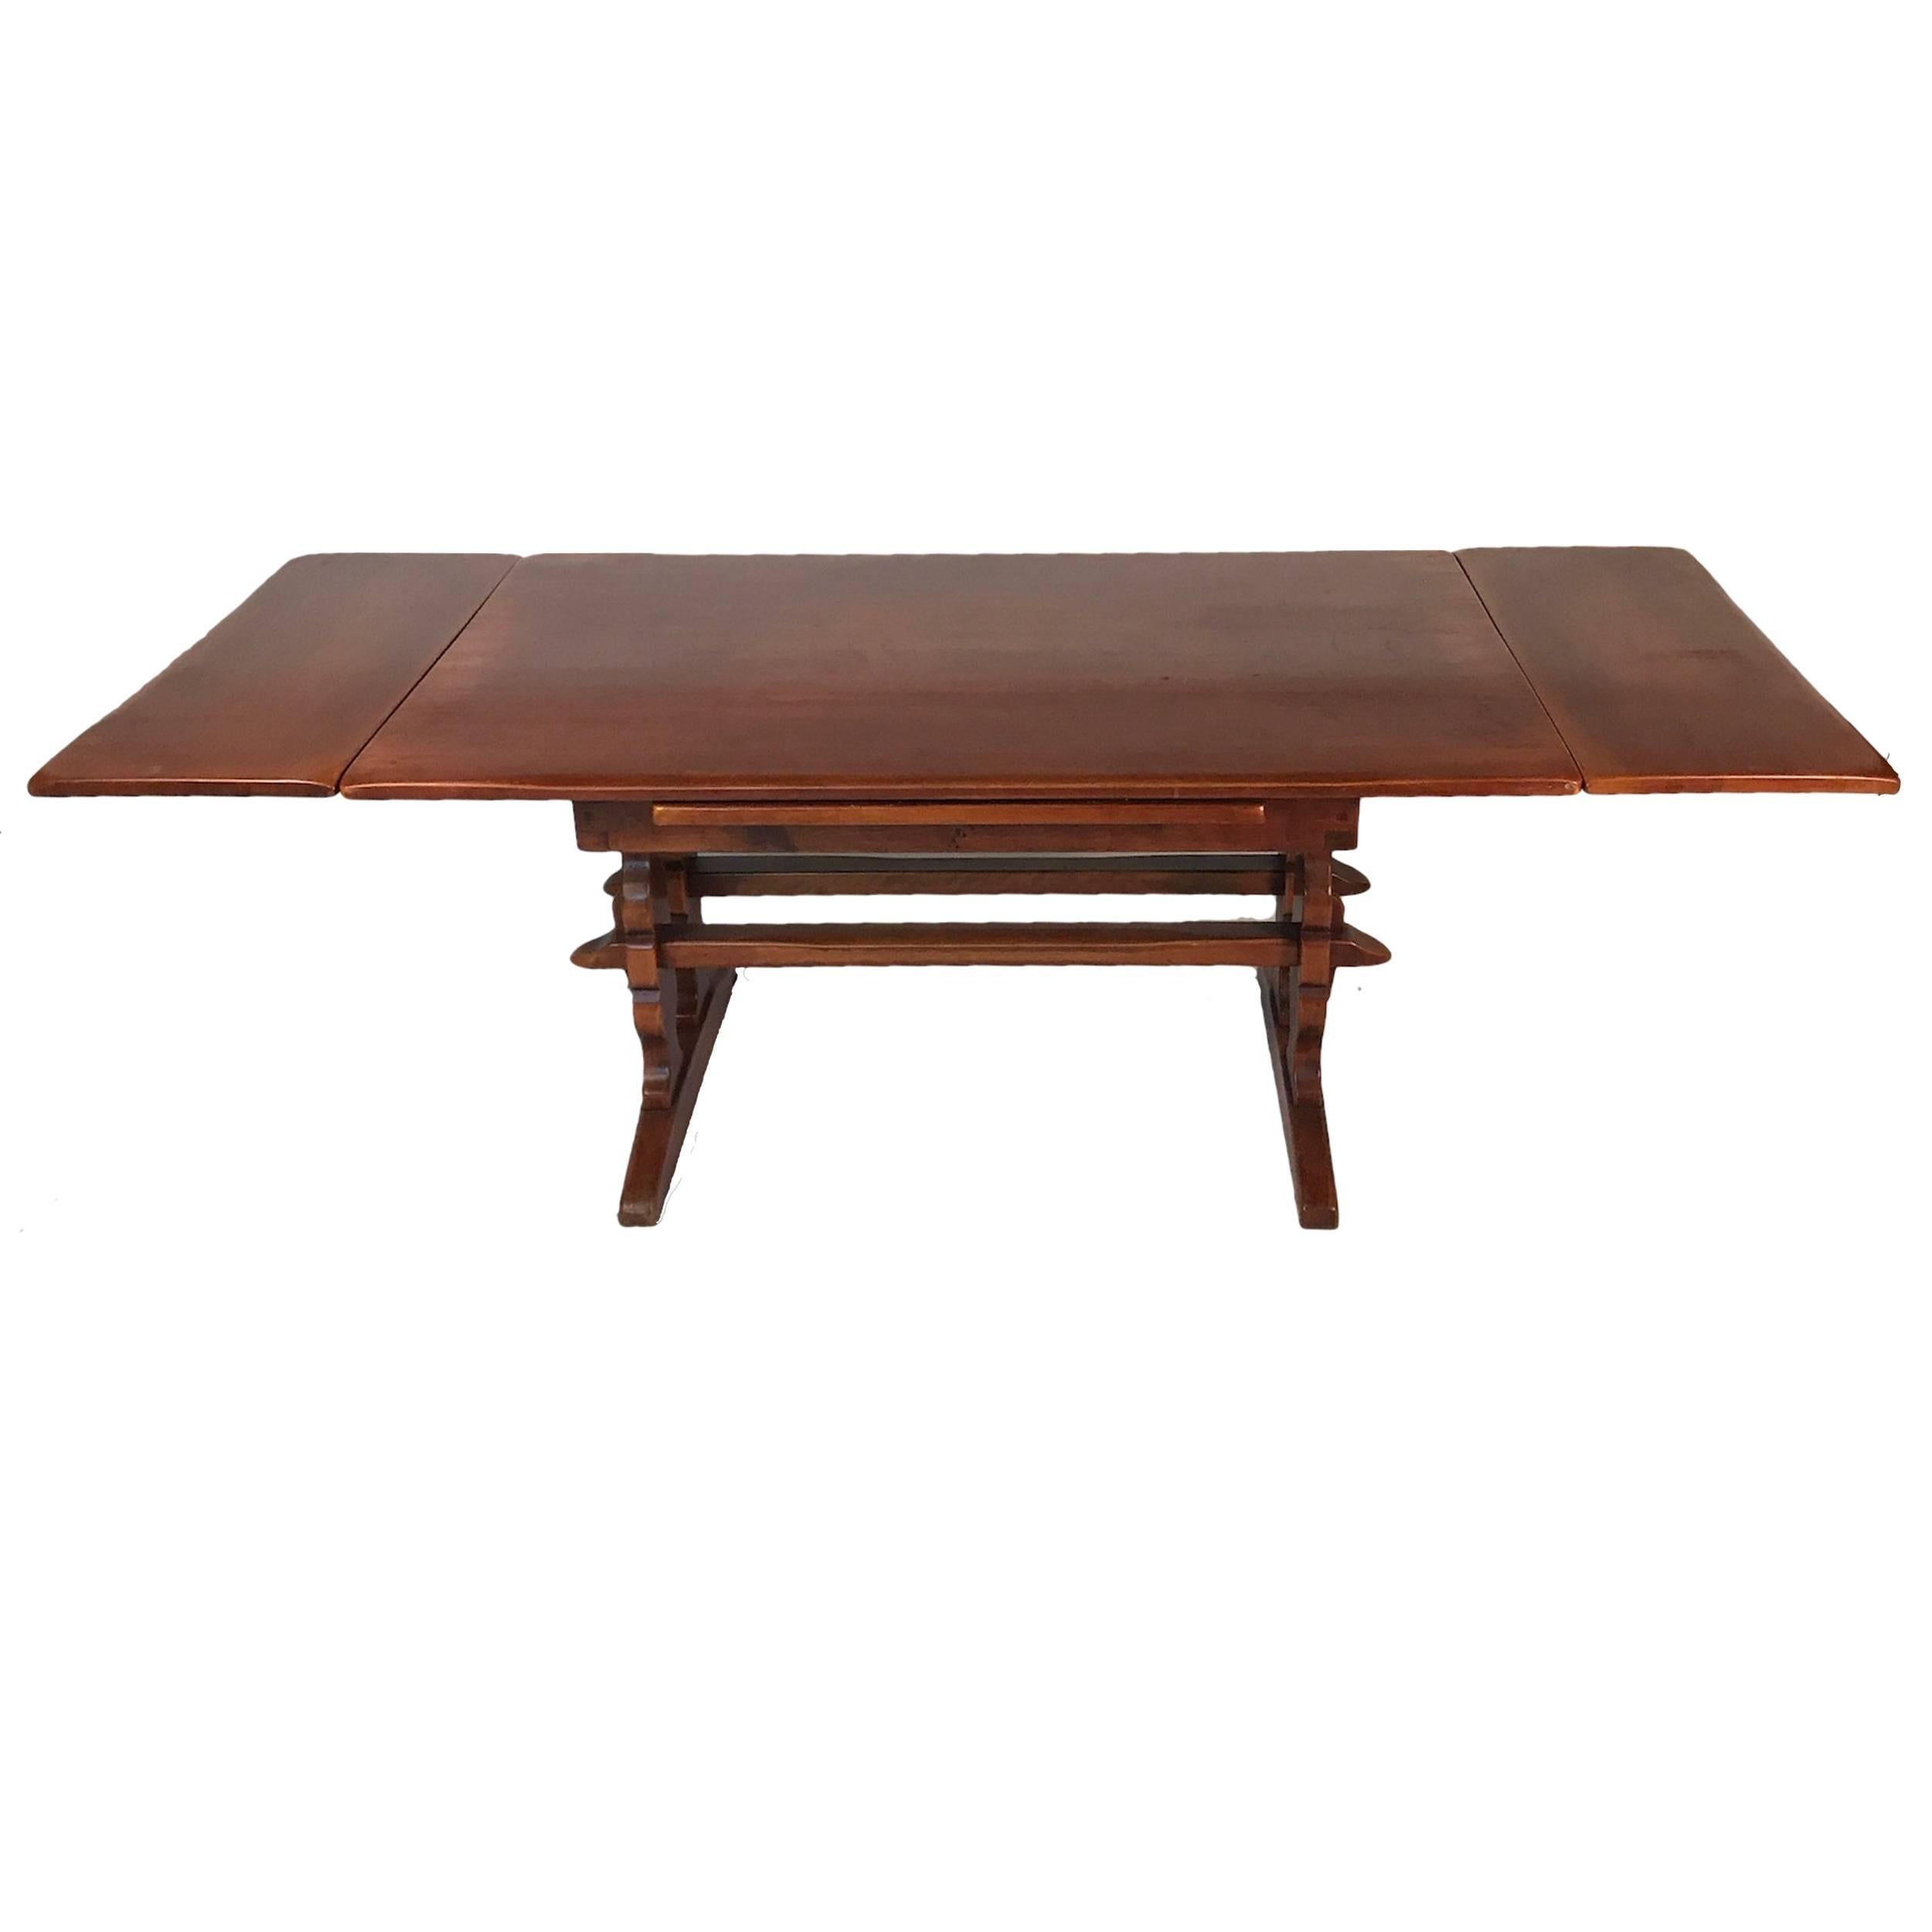 Hardwood Solid Americana Vermont Hard Rock Maple Extension Dining Table by Herman DeVries